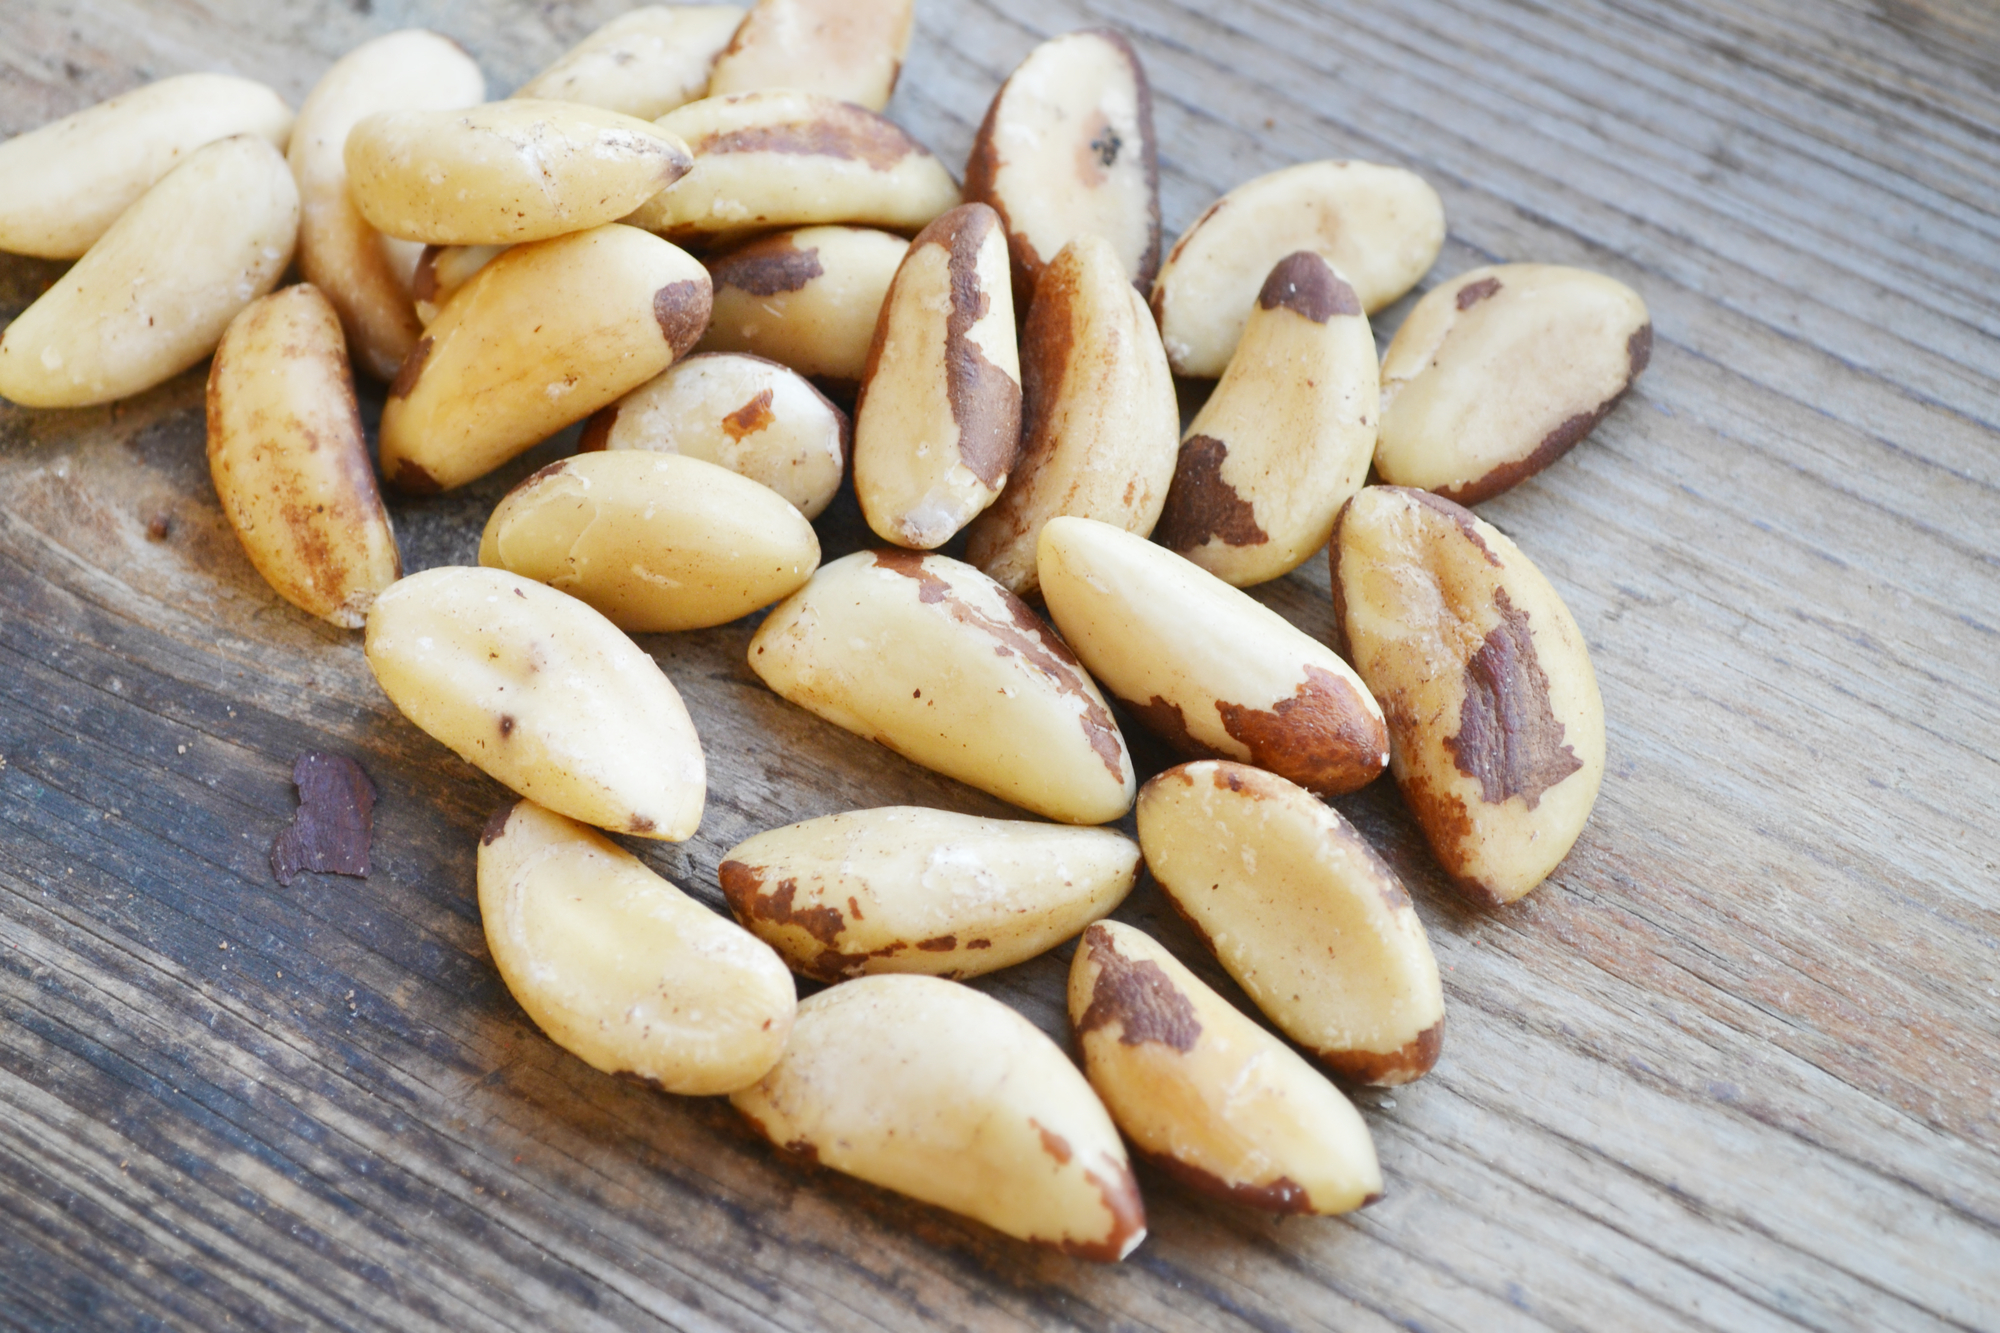 Brazil nuts - Healthy Comfort - 9 Foods That Help Your Mood